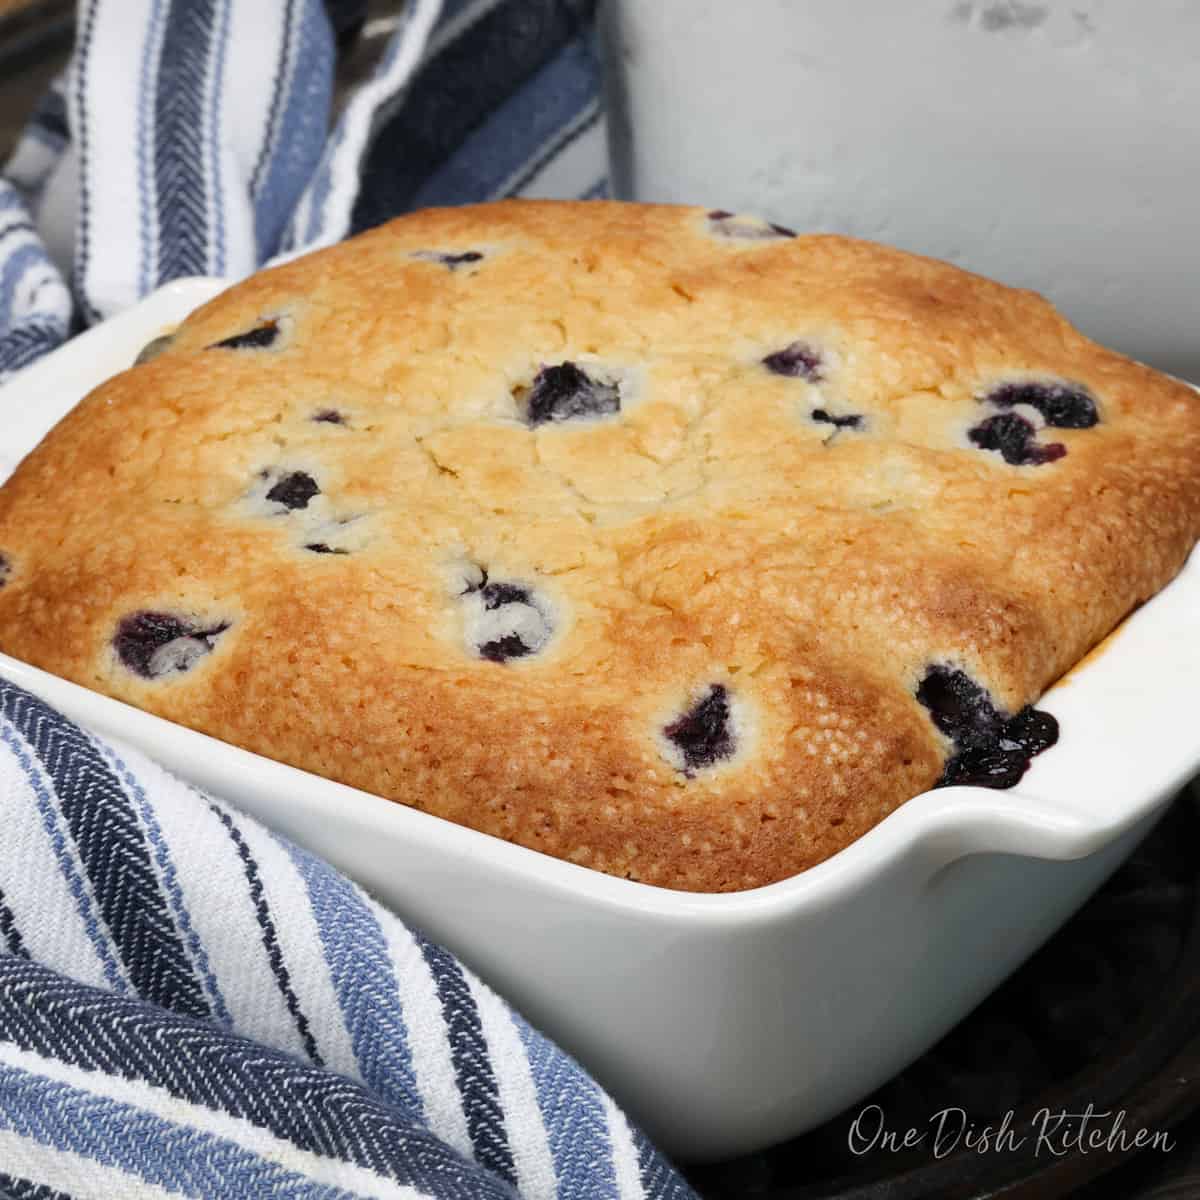 a square cake with blueberries next to a blue towel.